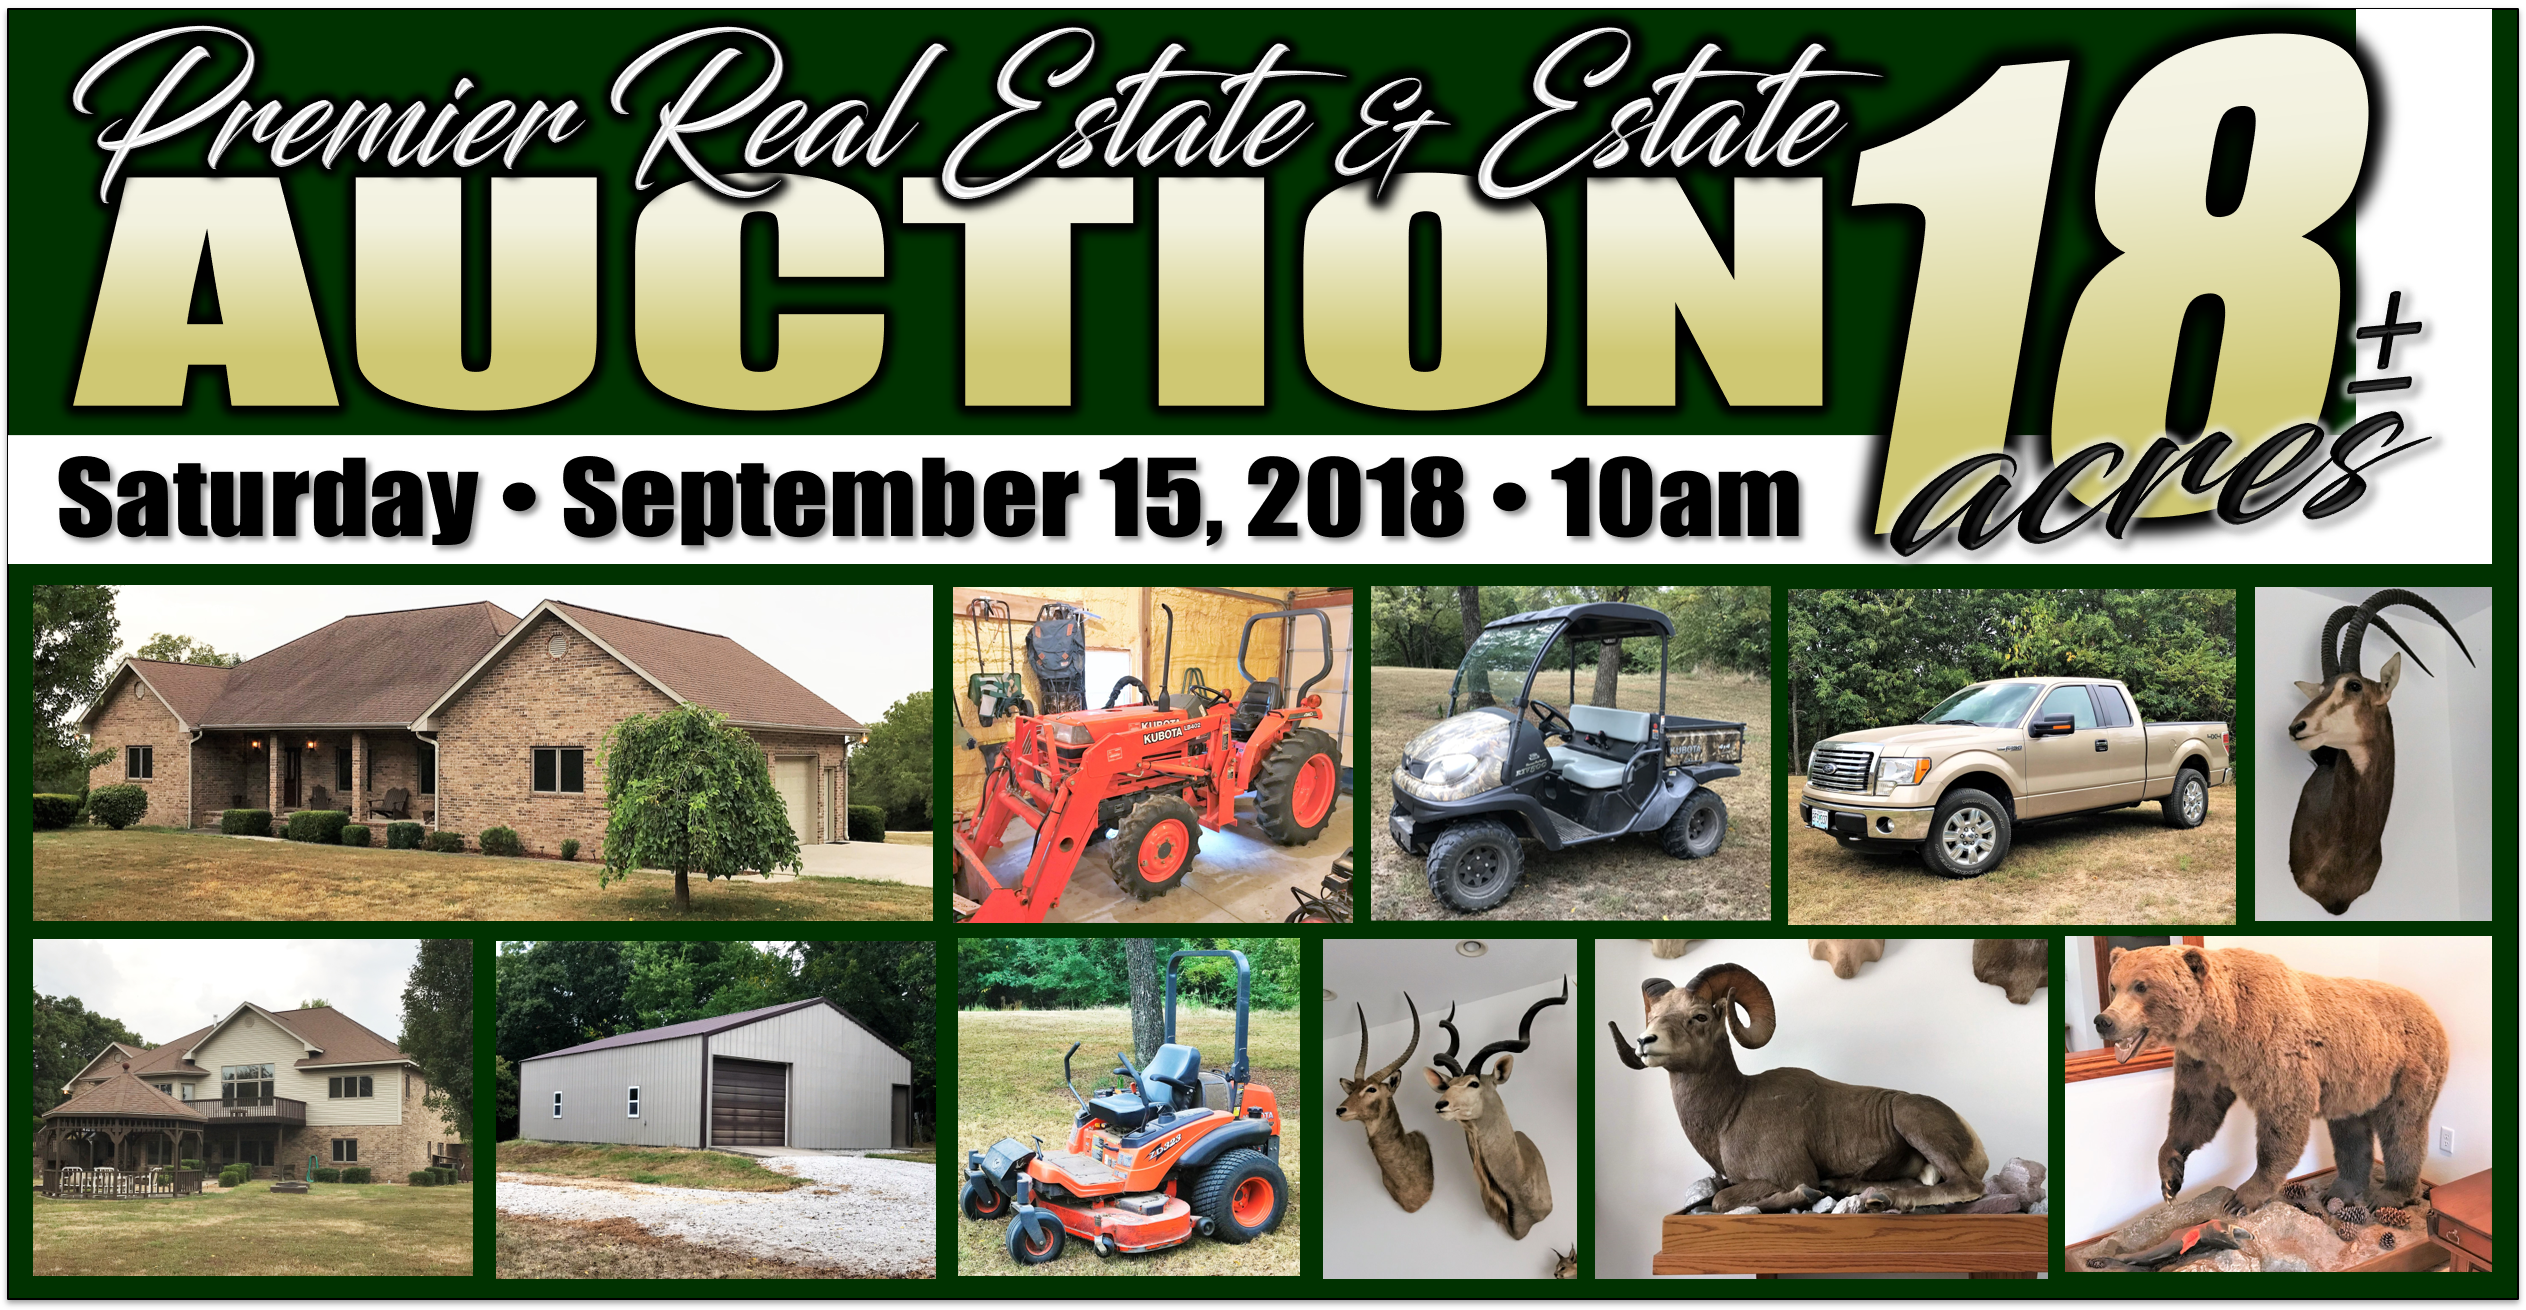 Premier Real Estate & Personal Property Auction